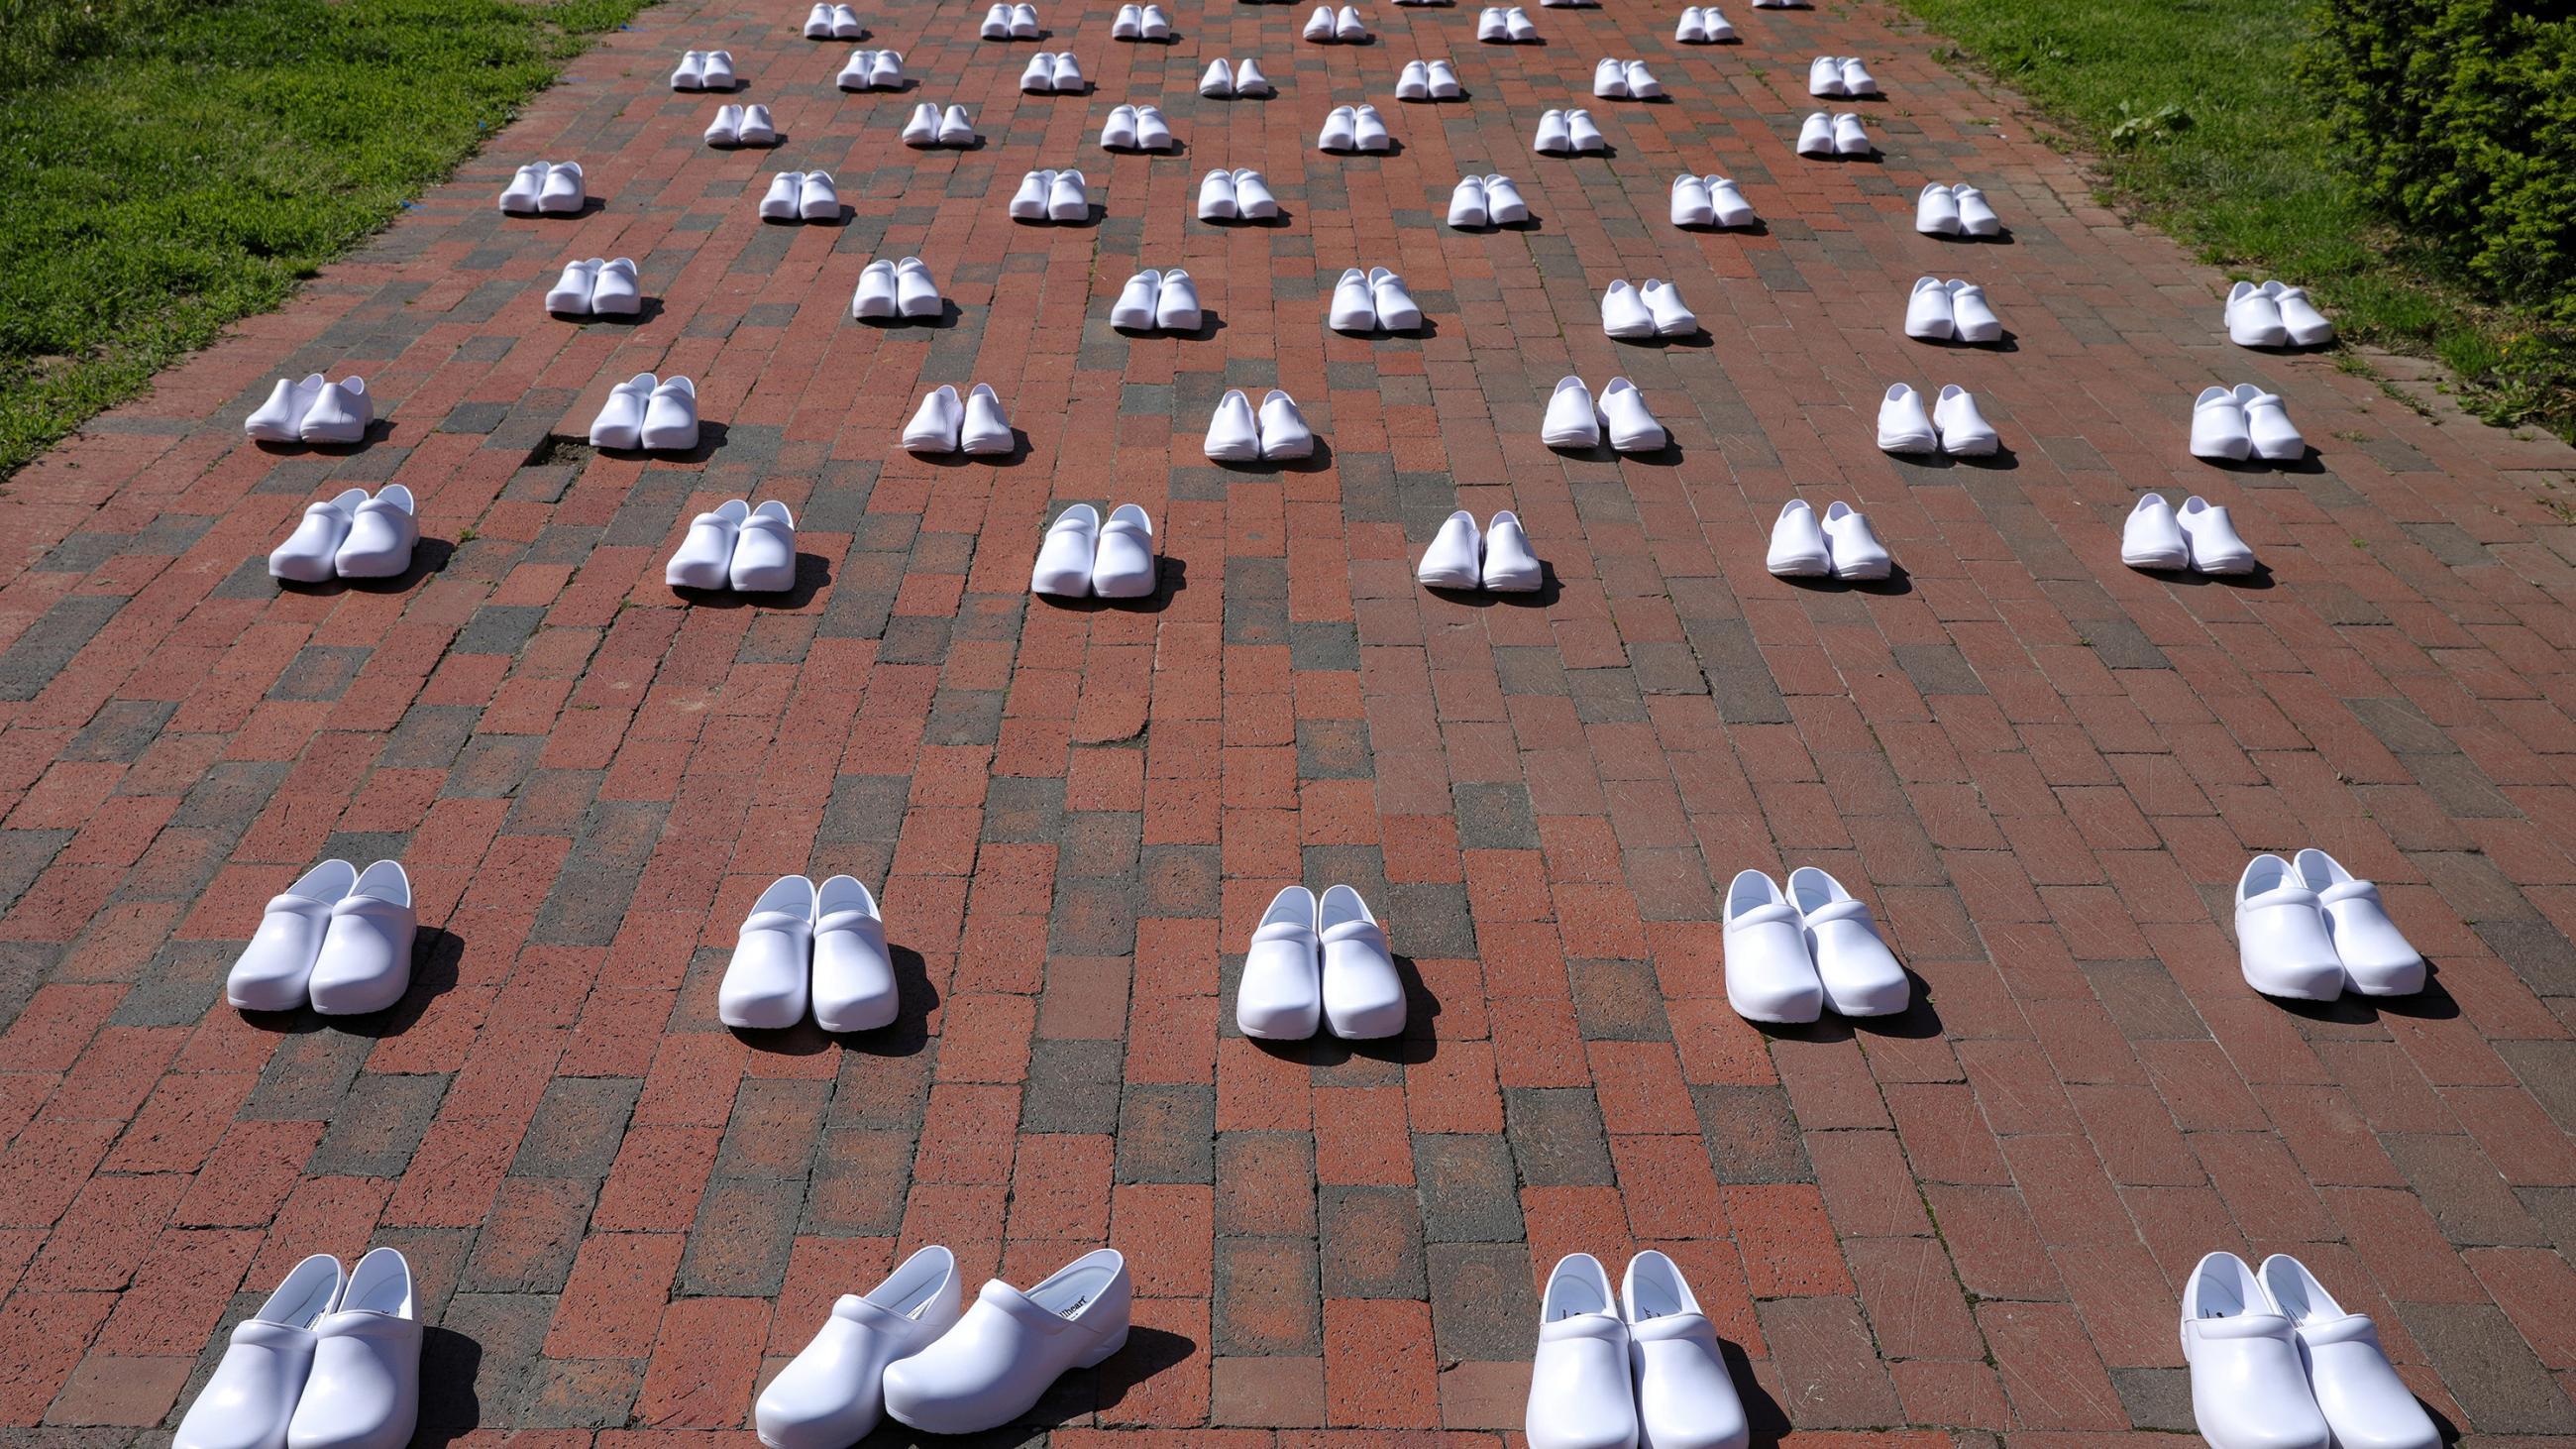 The photo shows an array of white shoes lined up along a paved path. One pair in the front is slightly askew. 